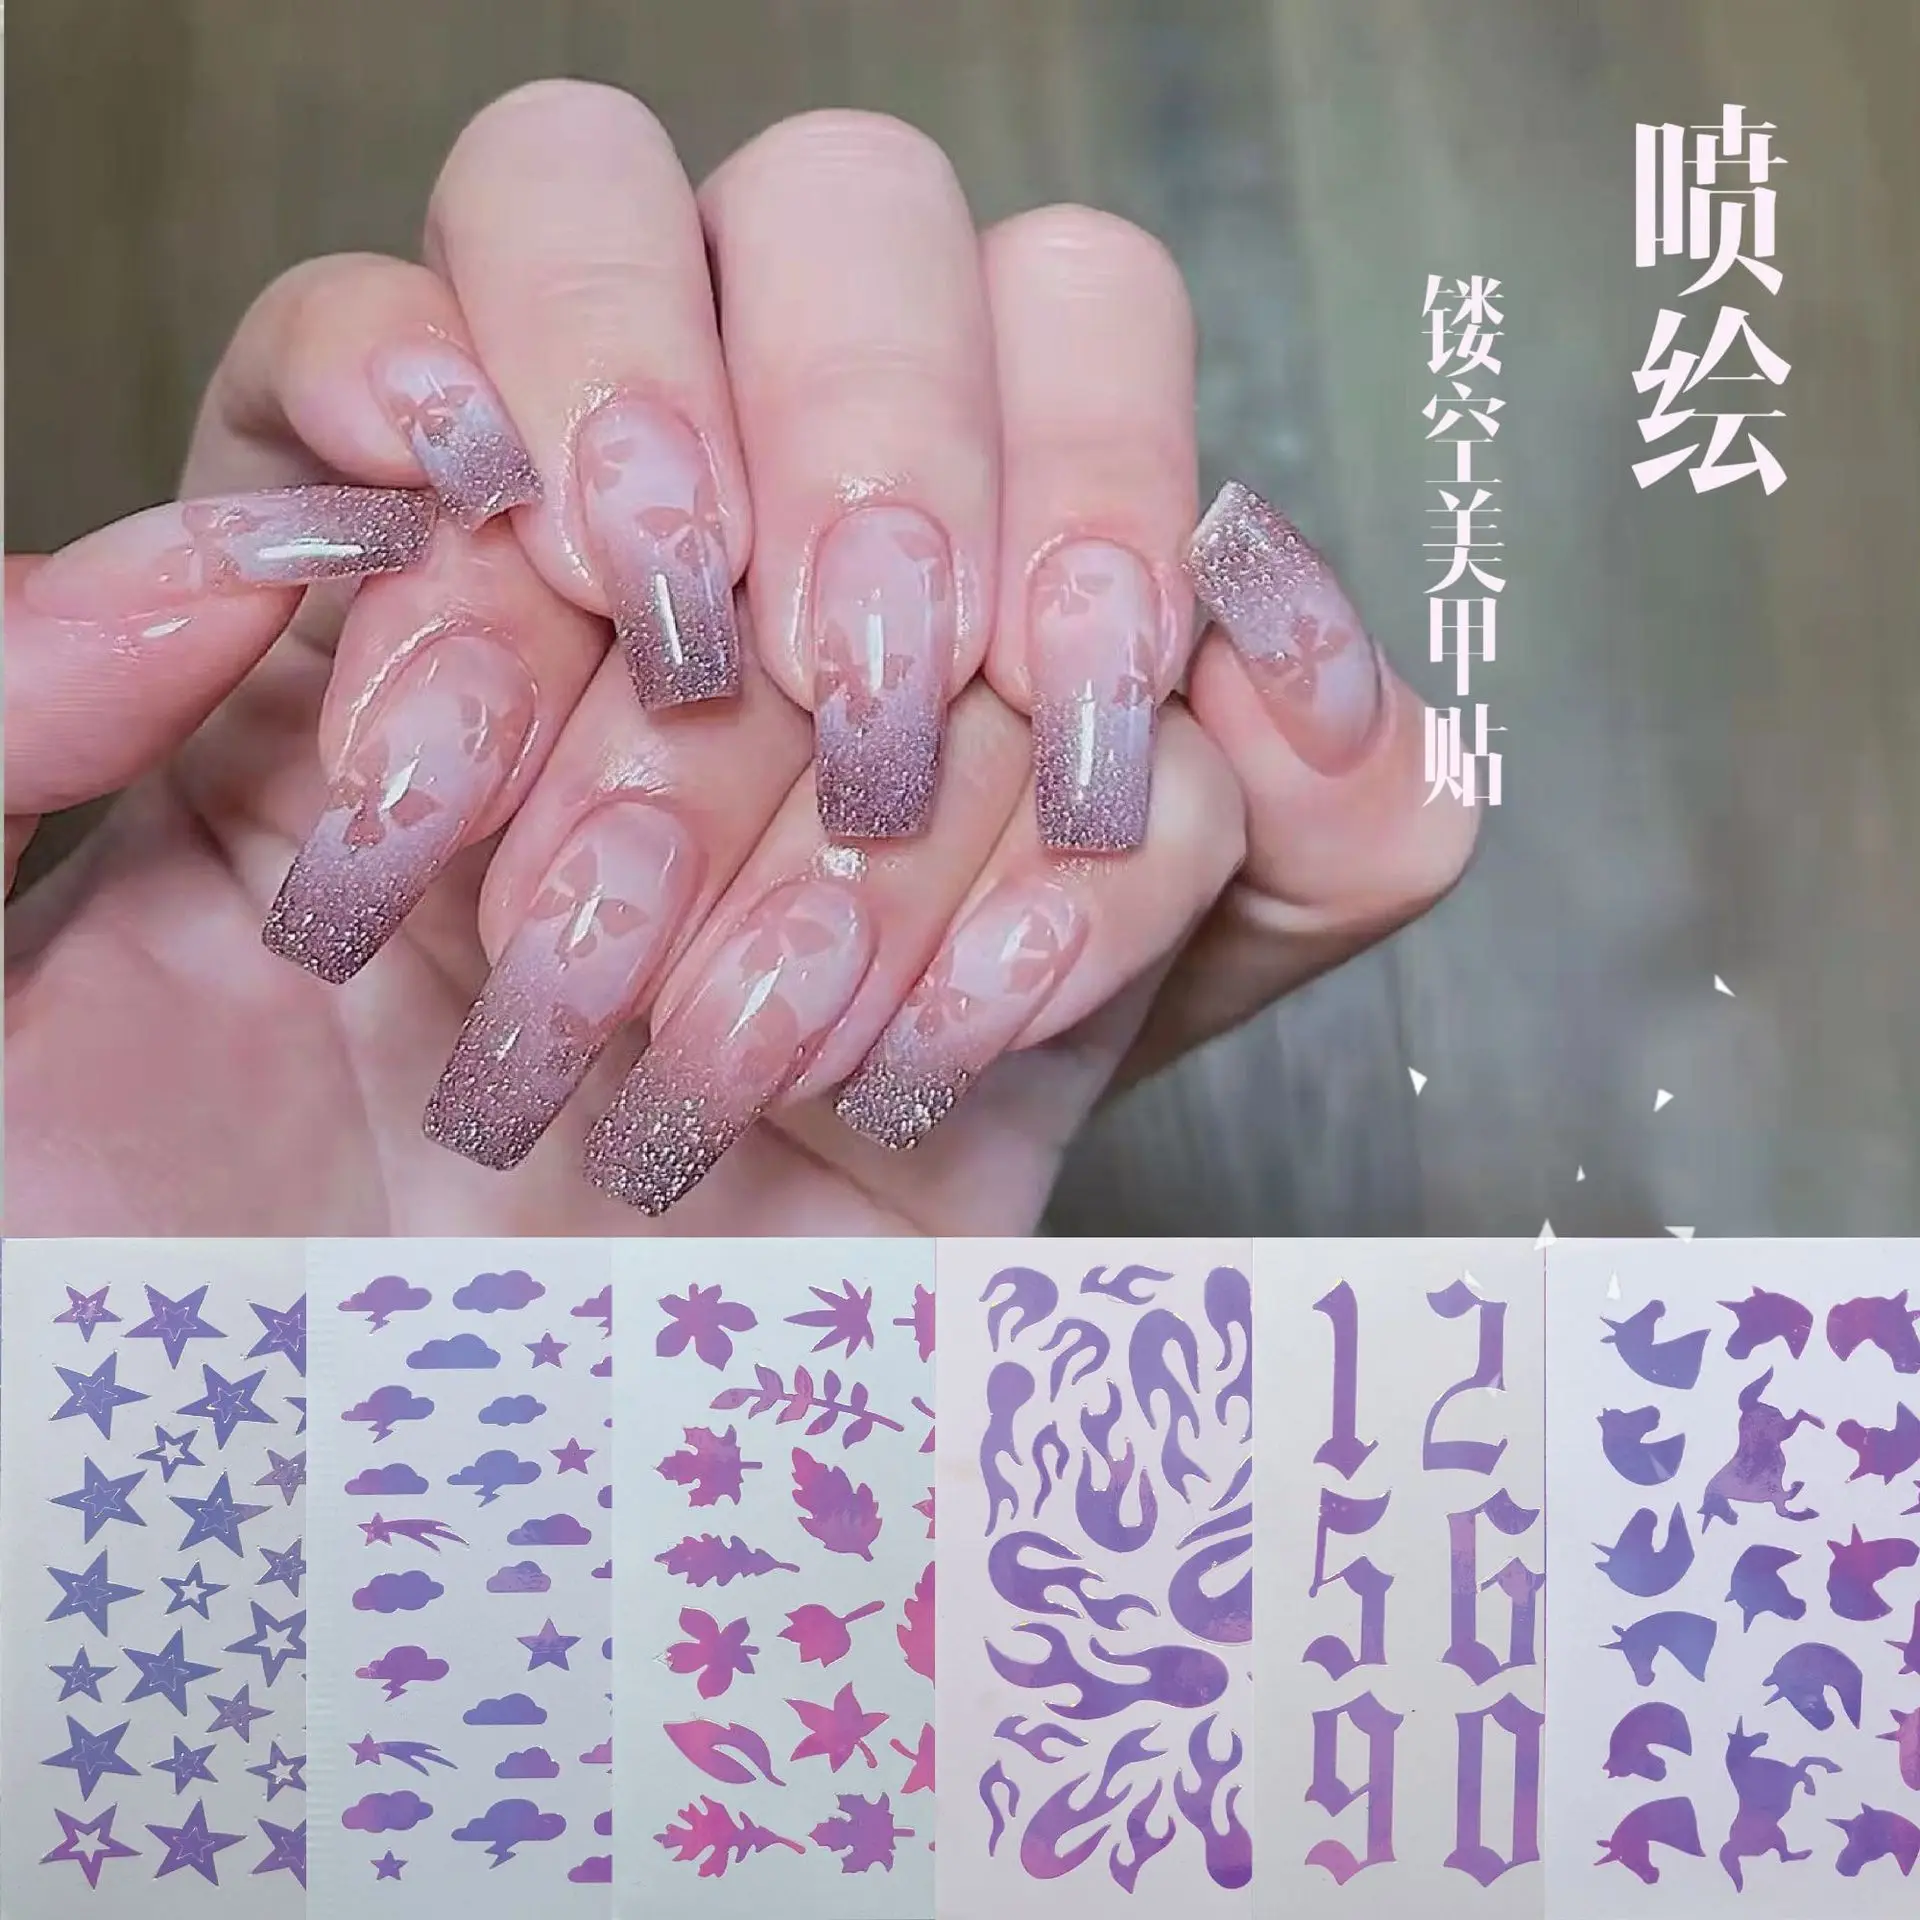 9 Sheets Airbrush Nail Art Stencil Sticker Decals 3D Self-Adhesive  Butterfly Heart French Design Hollow Printing Template Stencil Nail Guide  Supplies